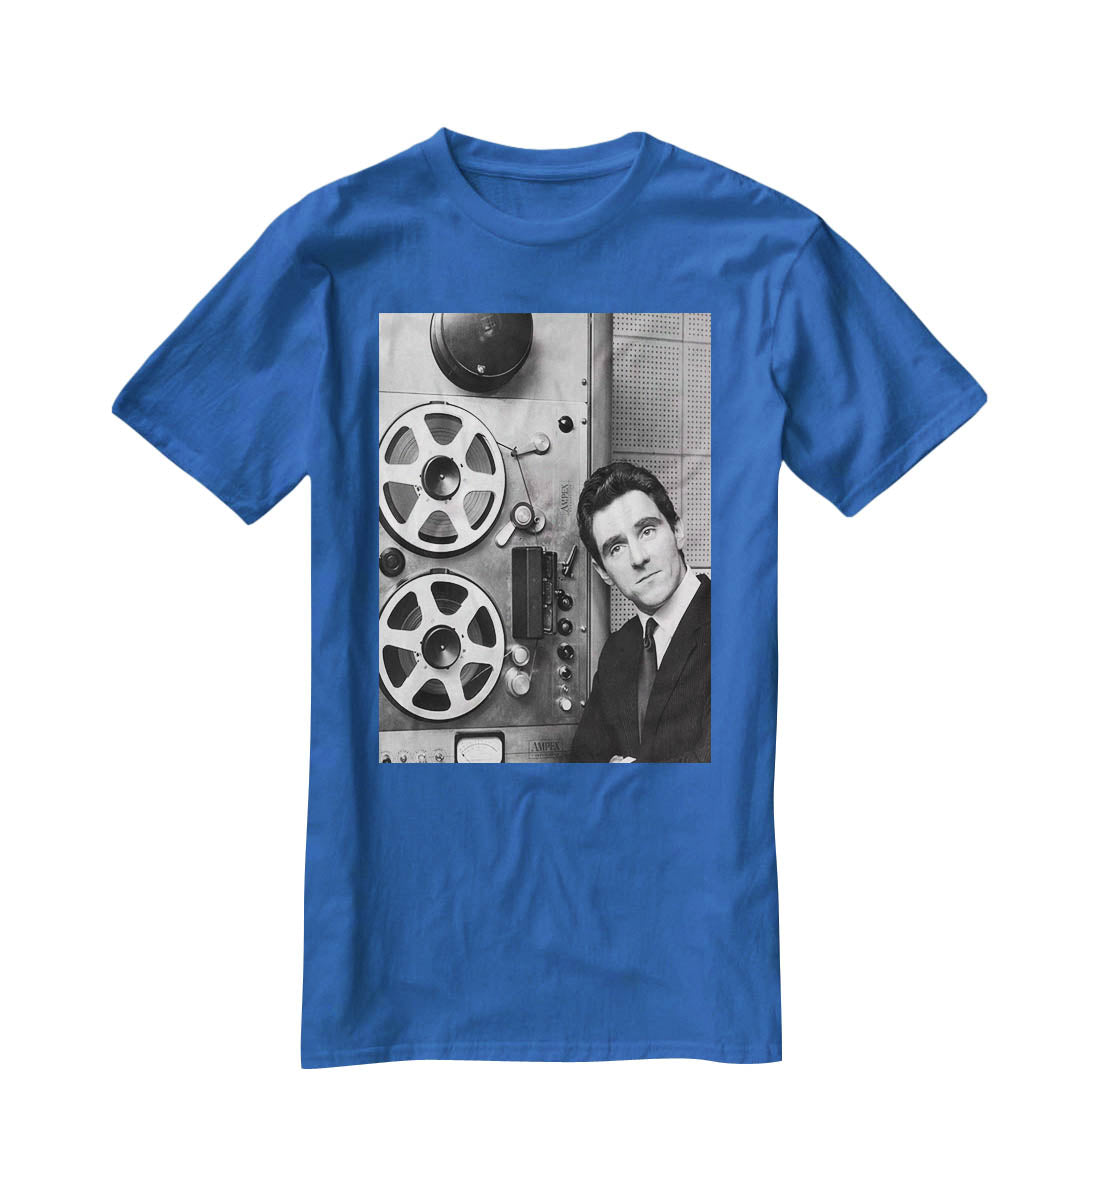 Anthony Newley in the recording studio T-Shirt - Canvas Art Rocks - 2